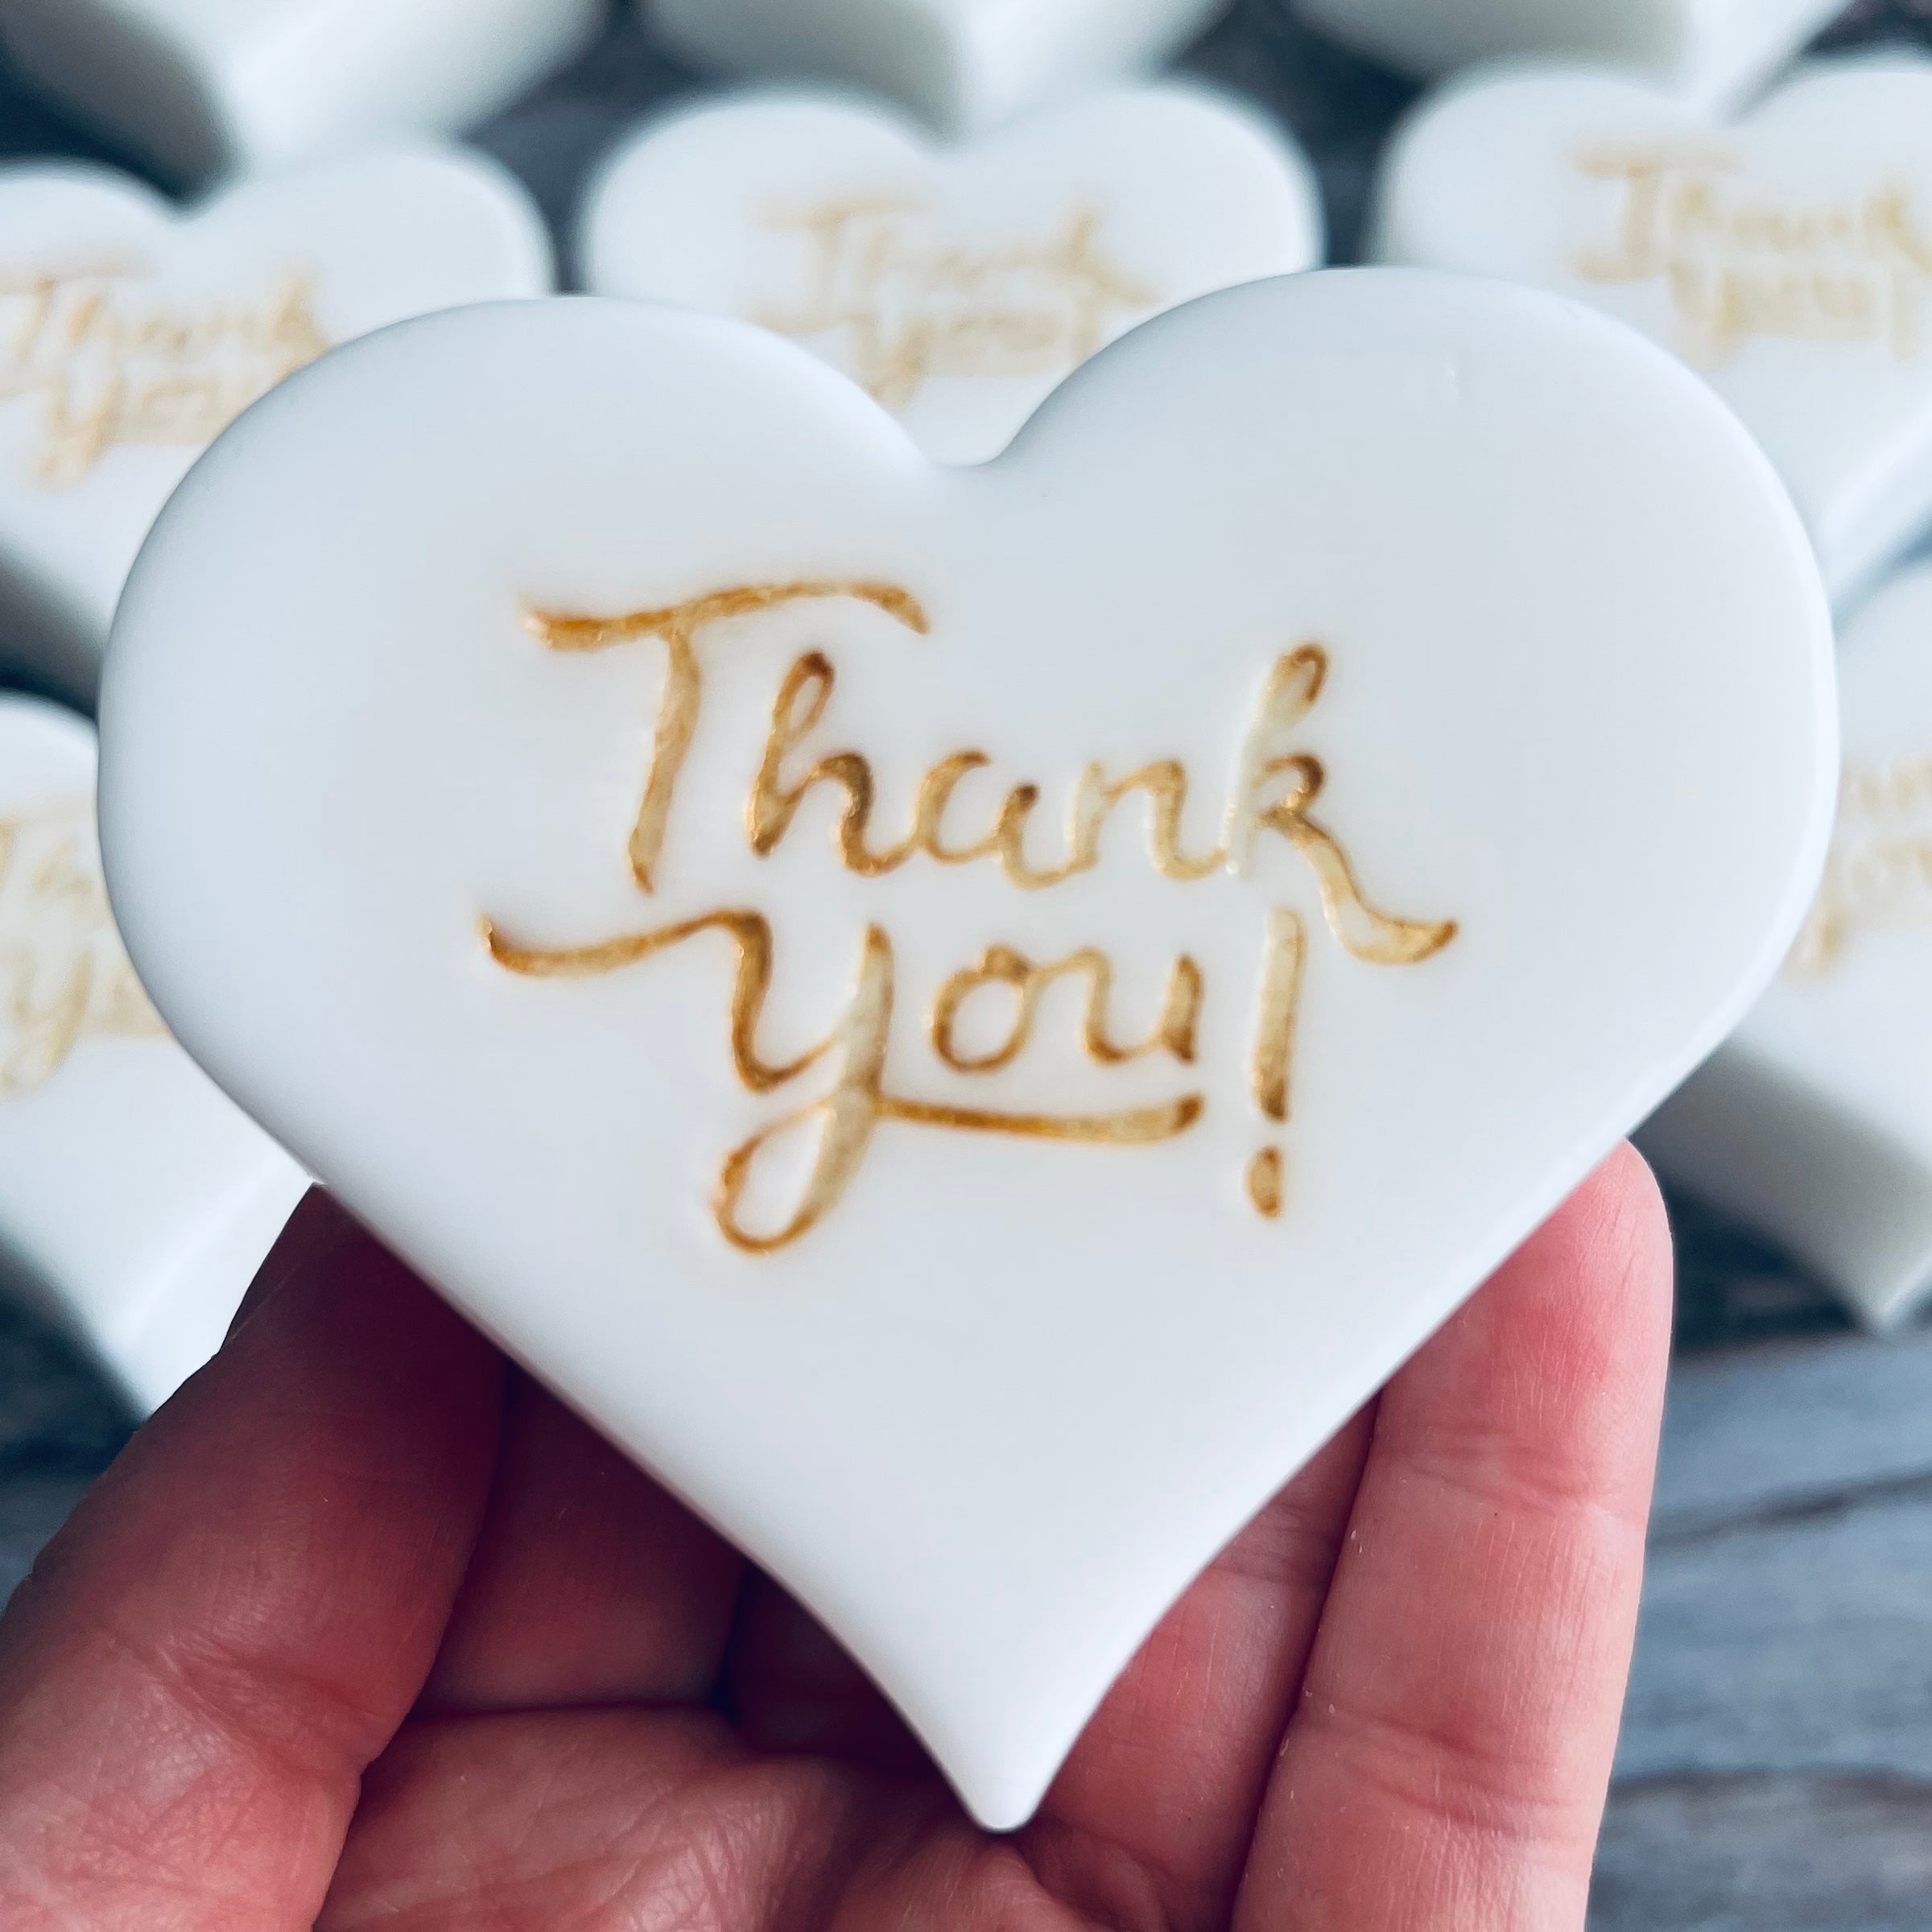 “Thank you” Heart Soap